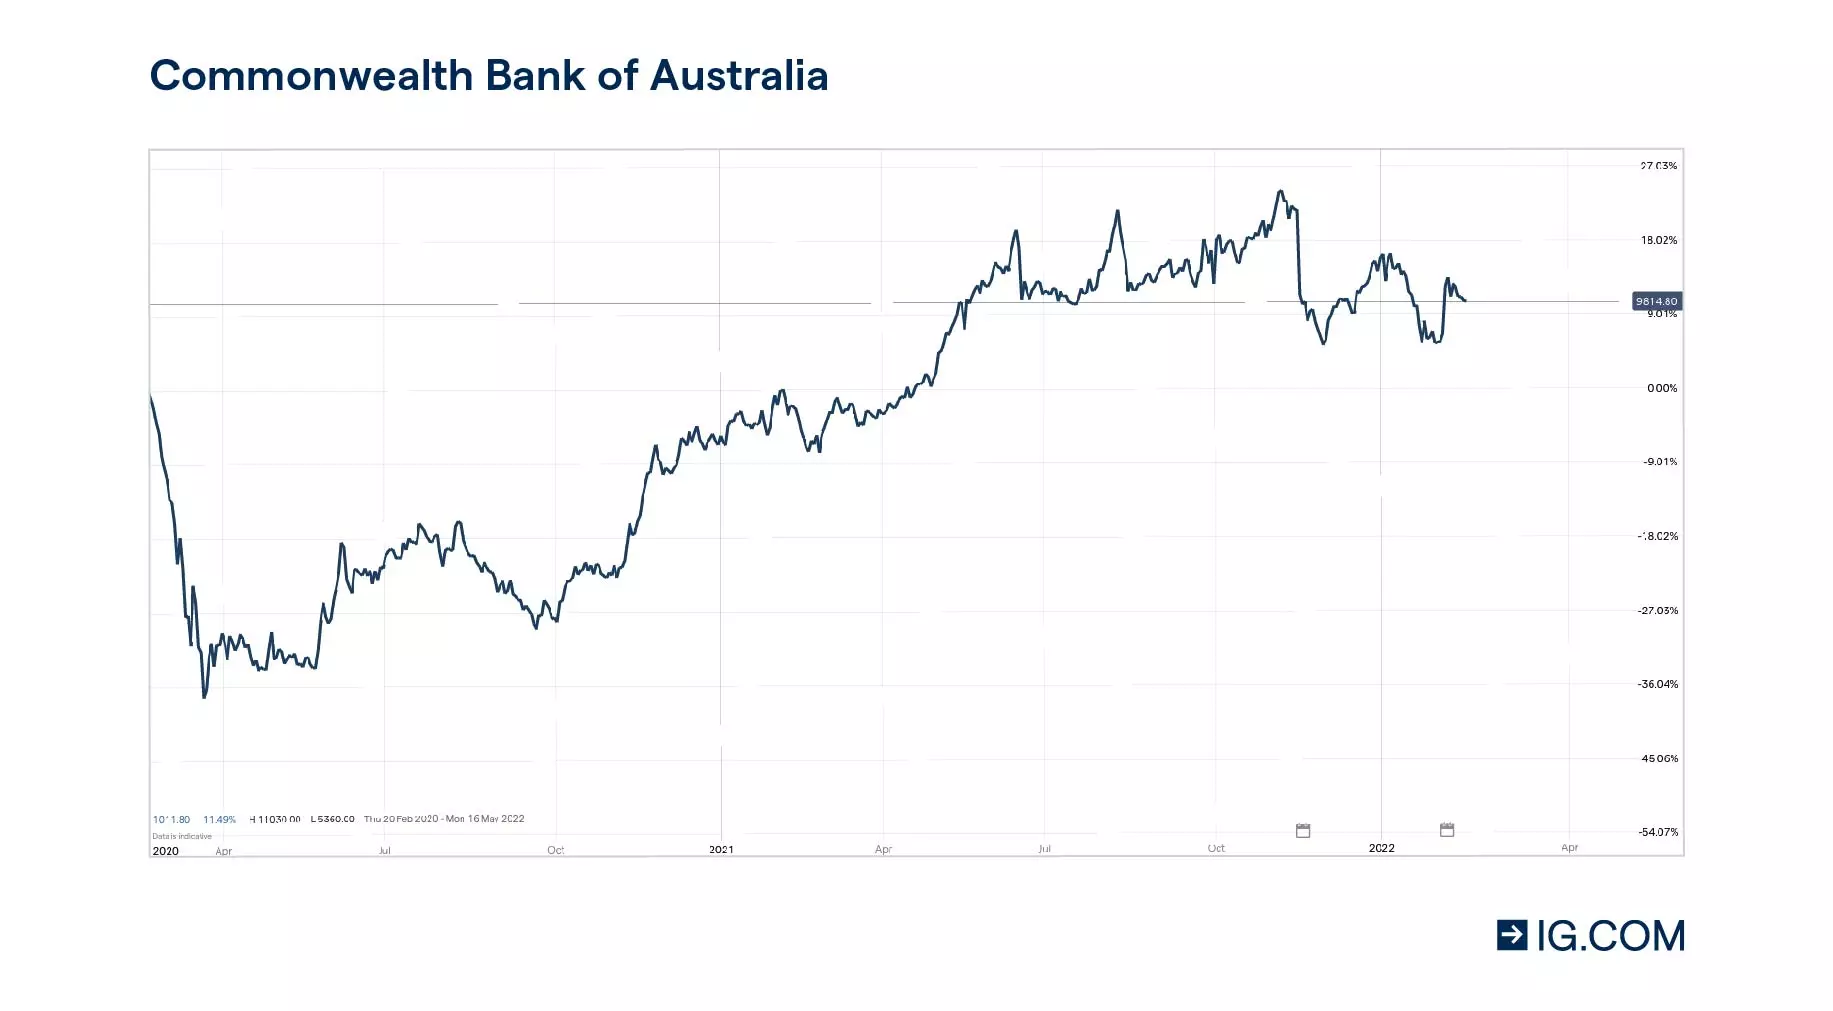 CBA price chart showing the share price fell to $53.40 at the start of the pandemic and rising to $110.10 two years later post-pandemic.